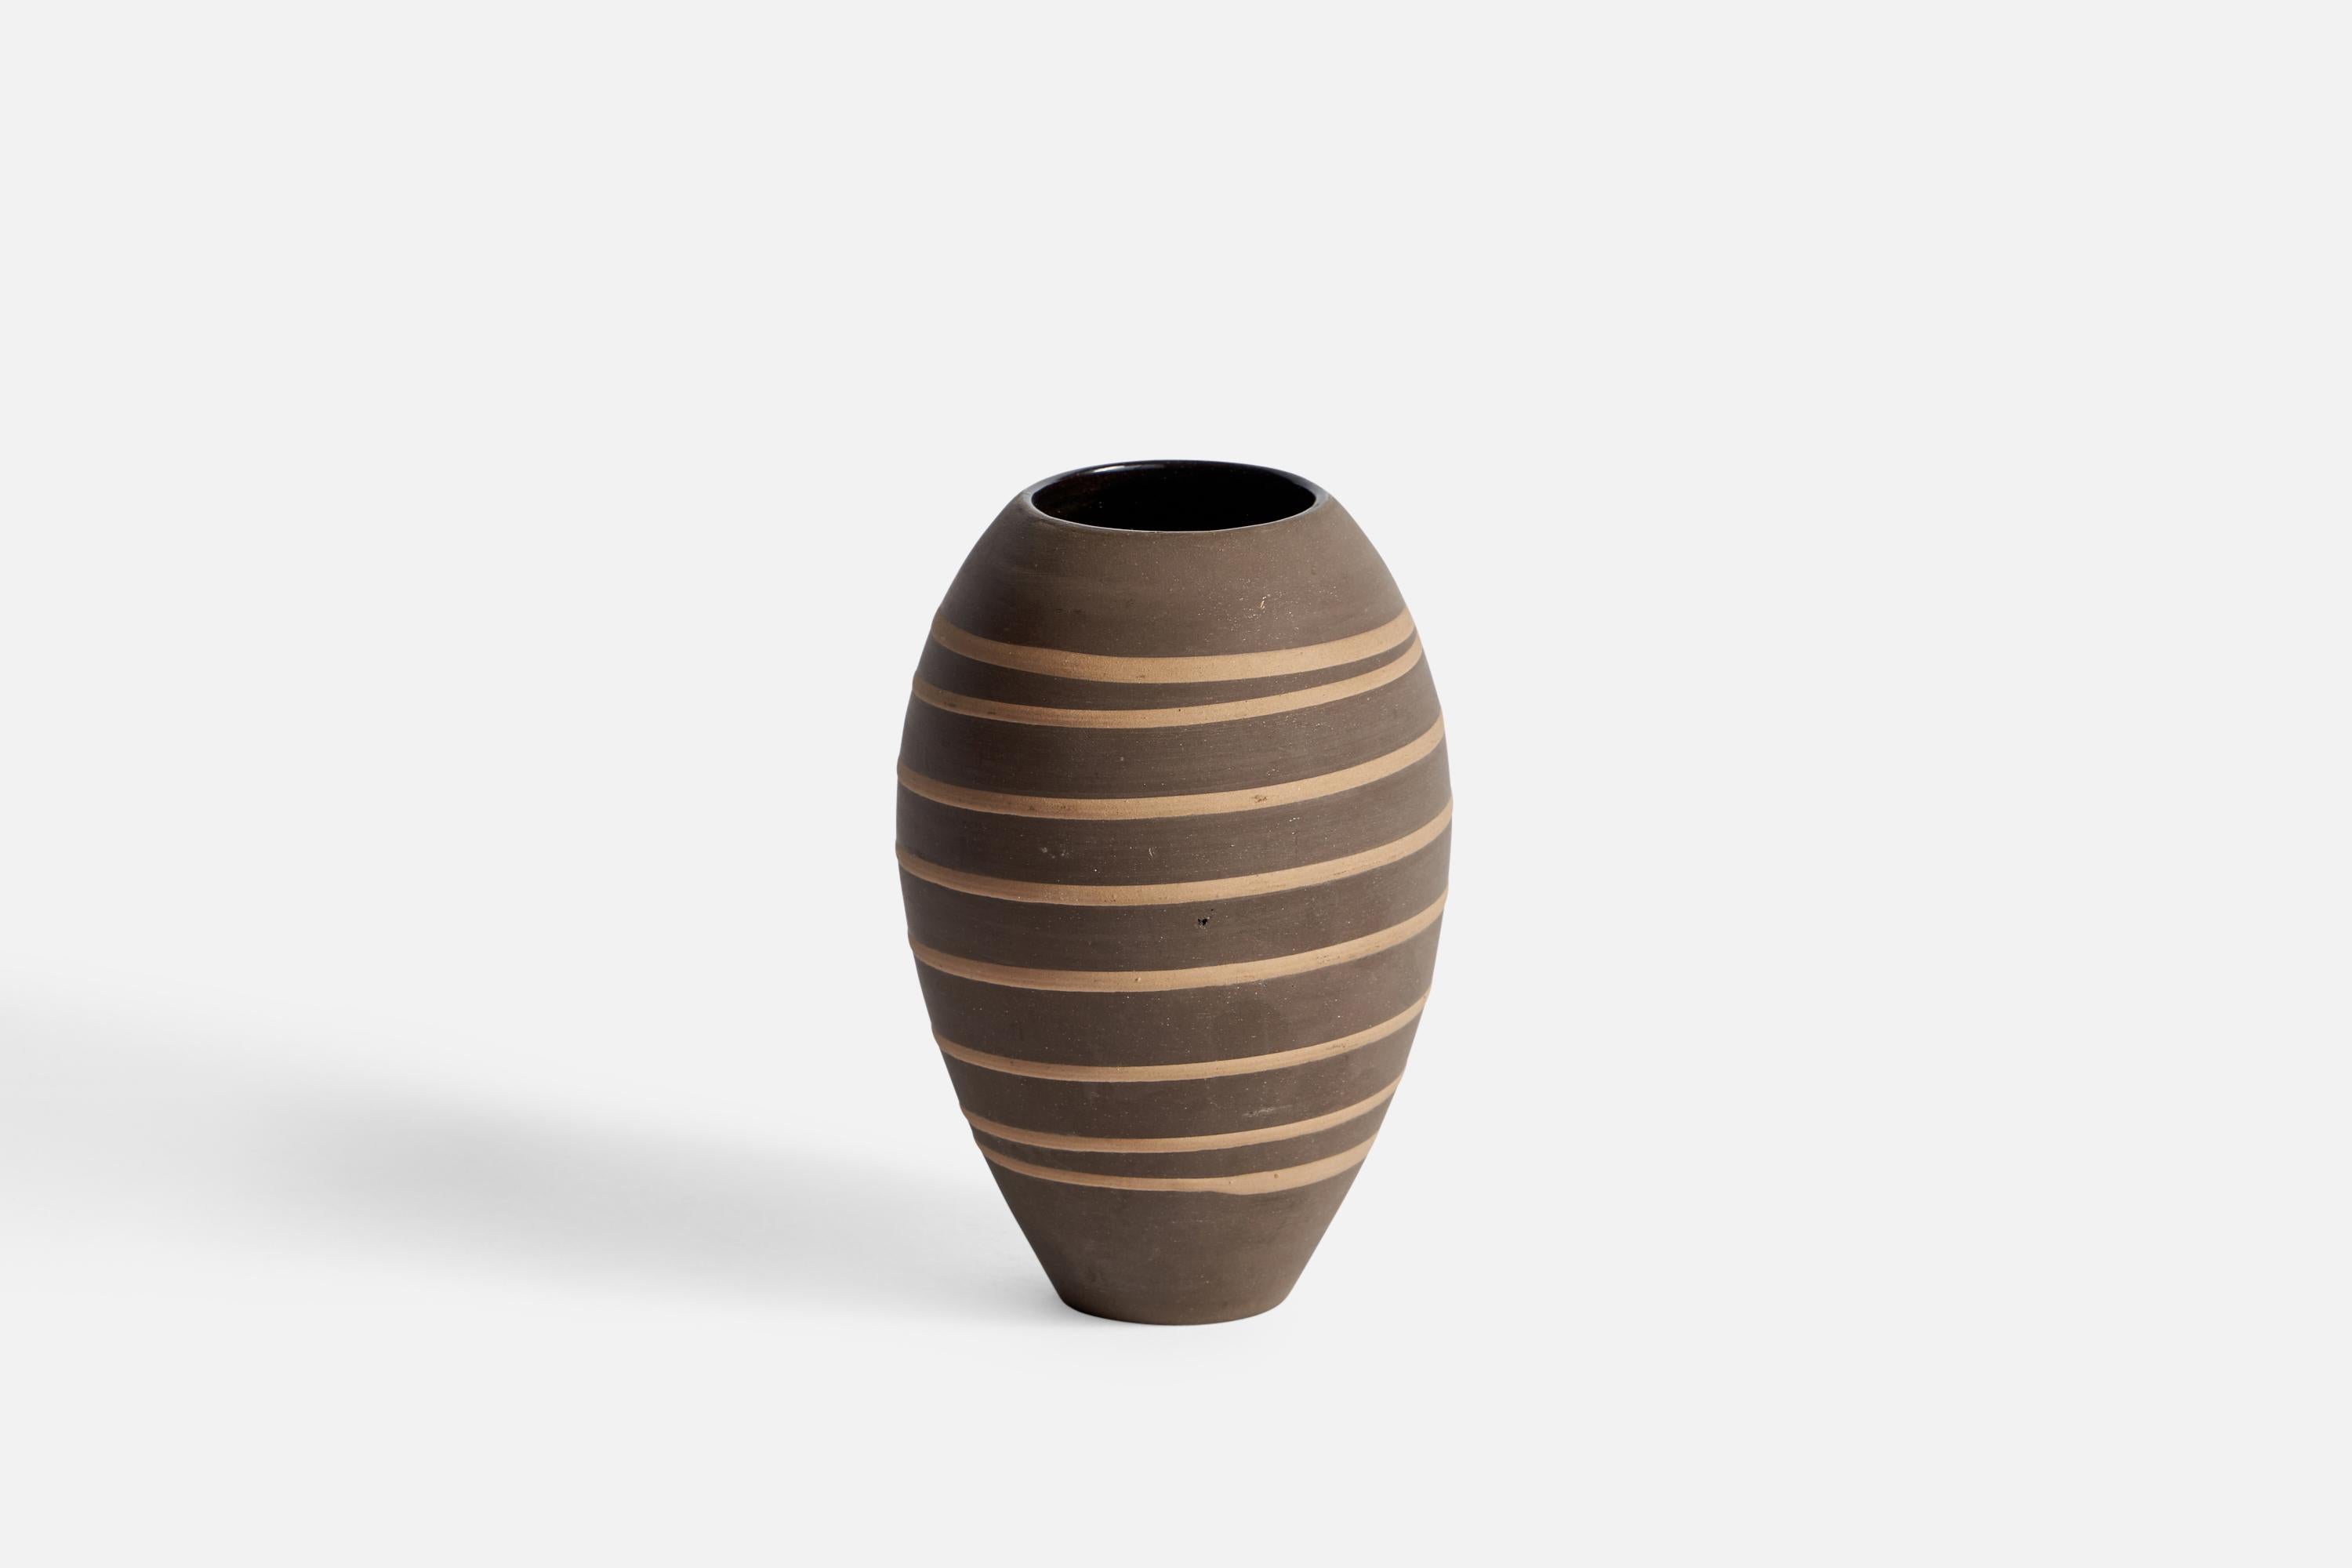 A brown and beige ceramic vase designed and produced in Sweden, 1940s.